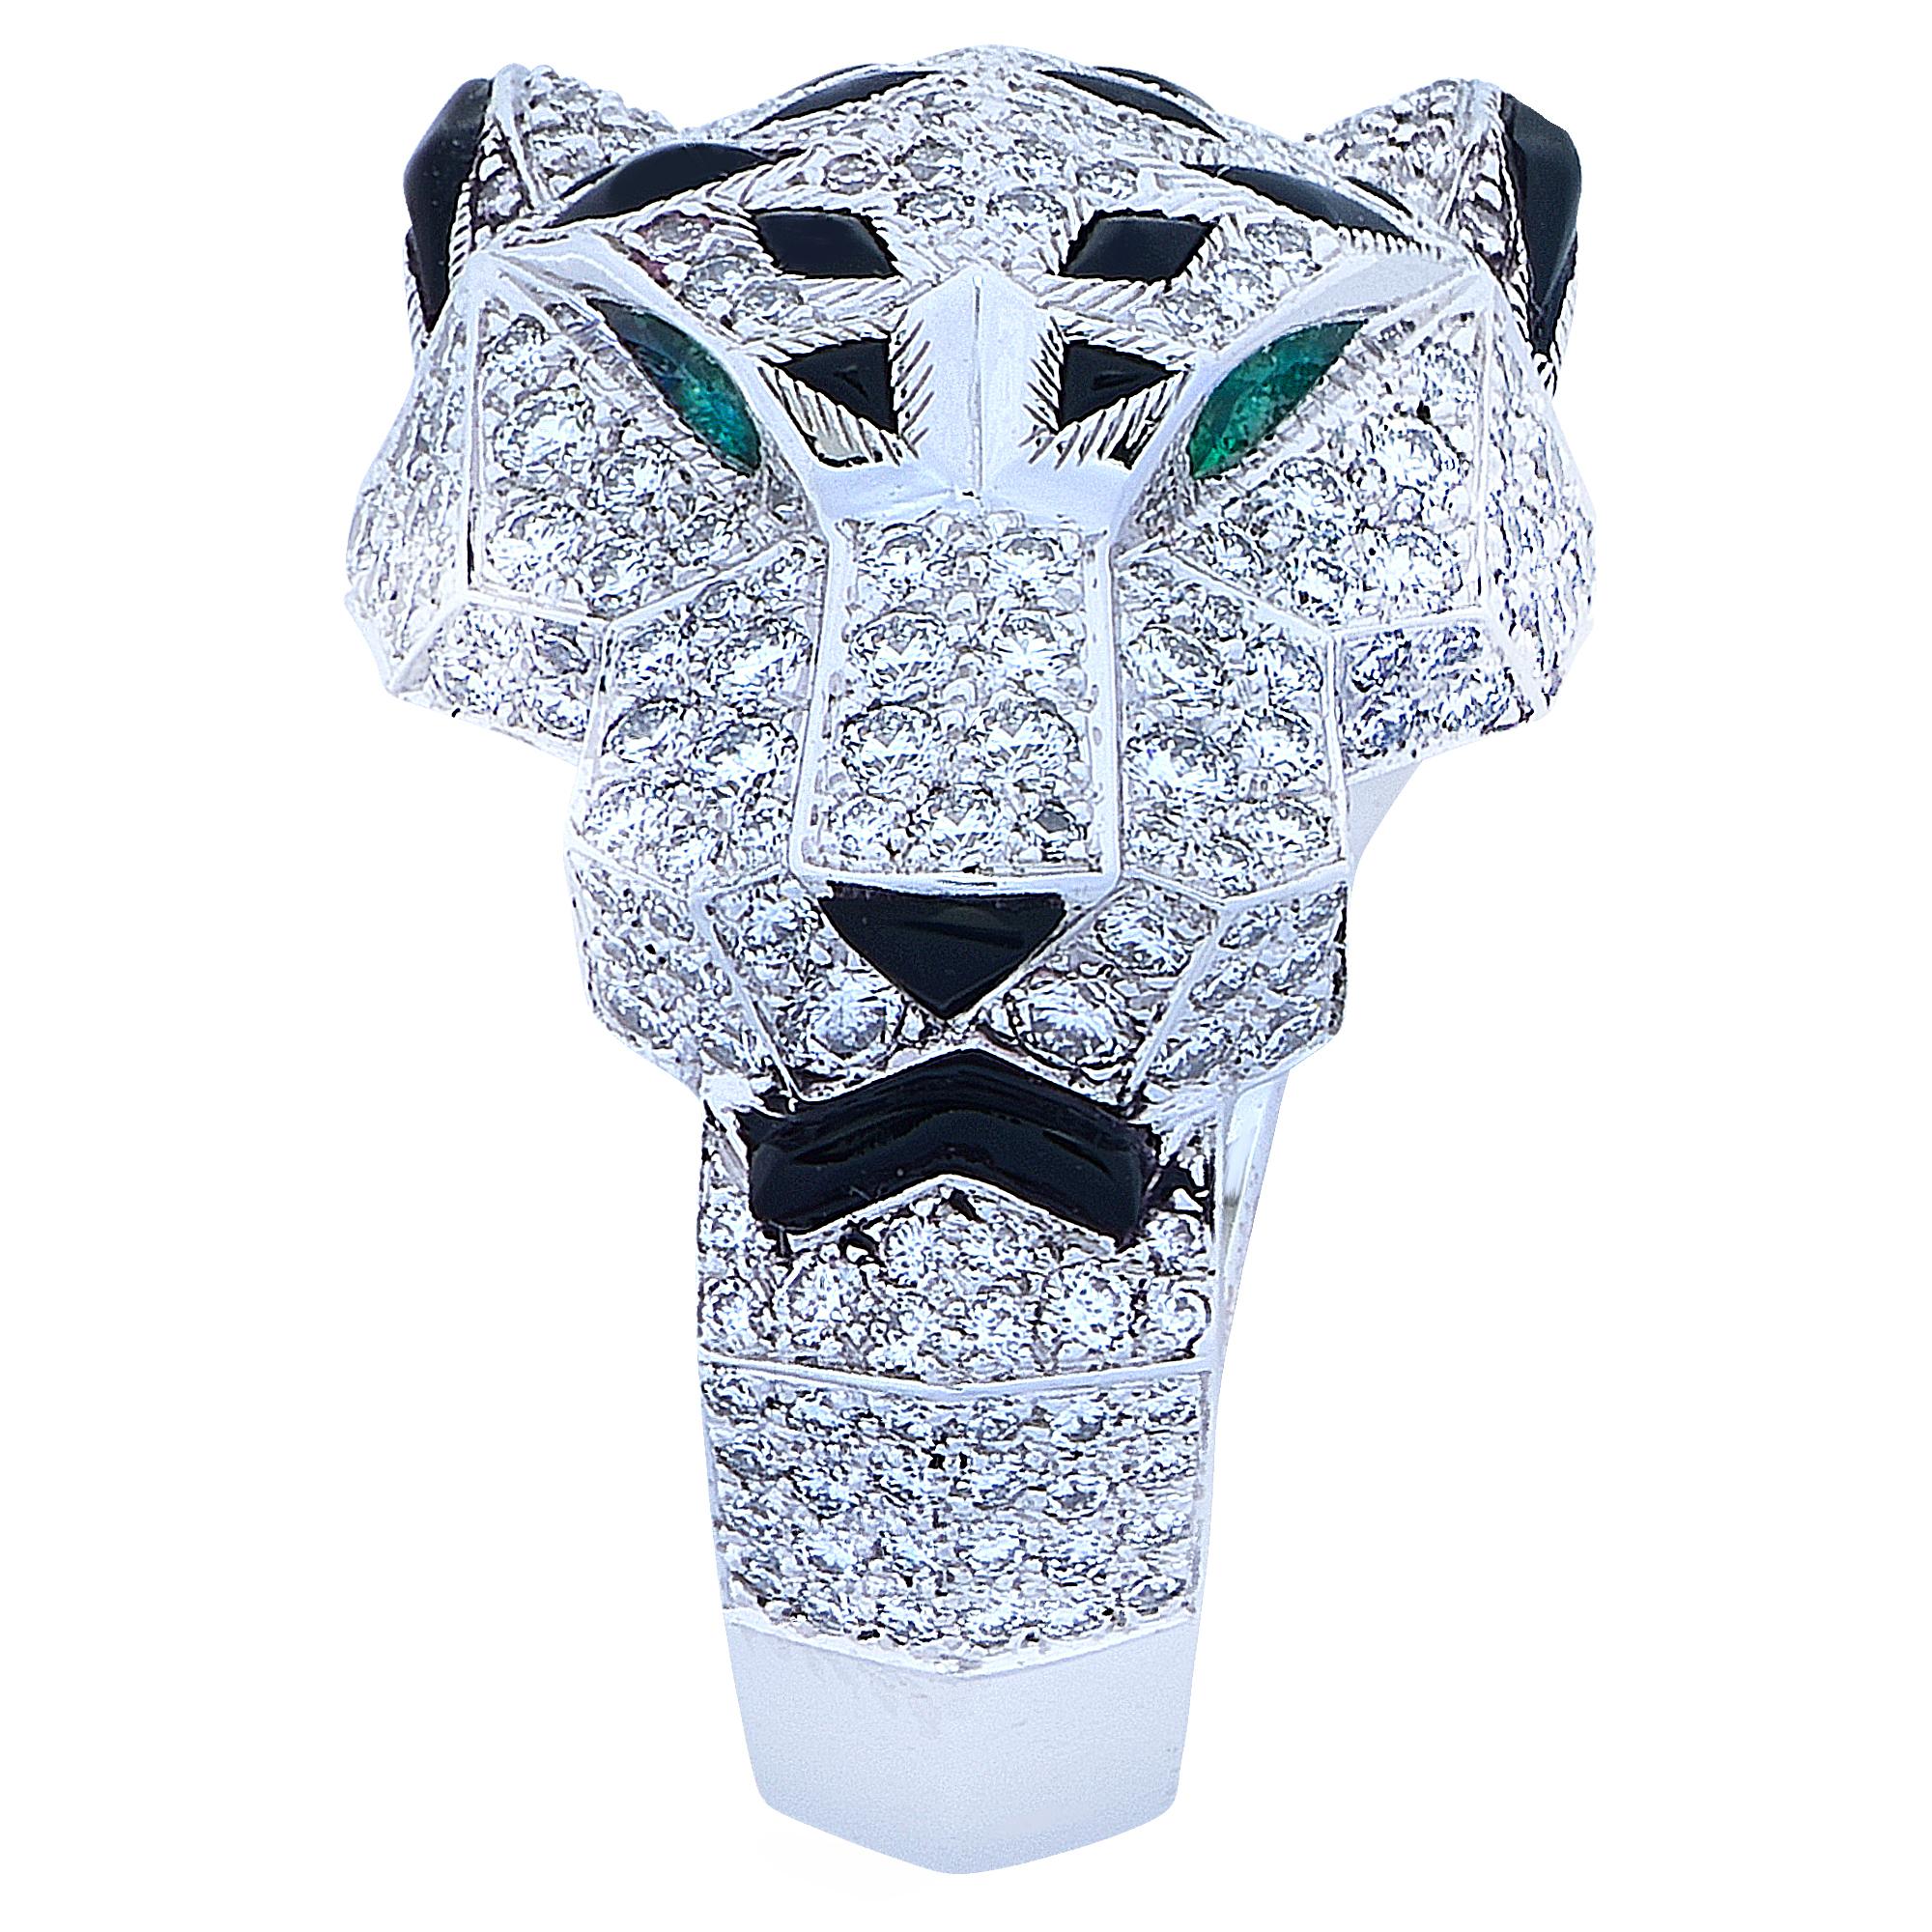 Stunning Panthere de Cartier ring, crafted in 18 karat white gold, encrusted with 365 diamonds weighing 2.55 carats total weight, with emerald eyes and an onyx nose and accents. The ring, which features Cartier’s iconic panther, is a European size